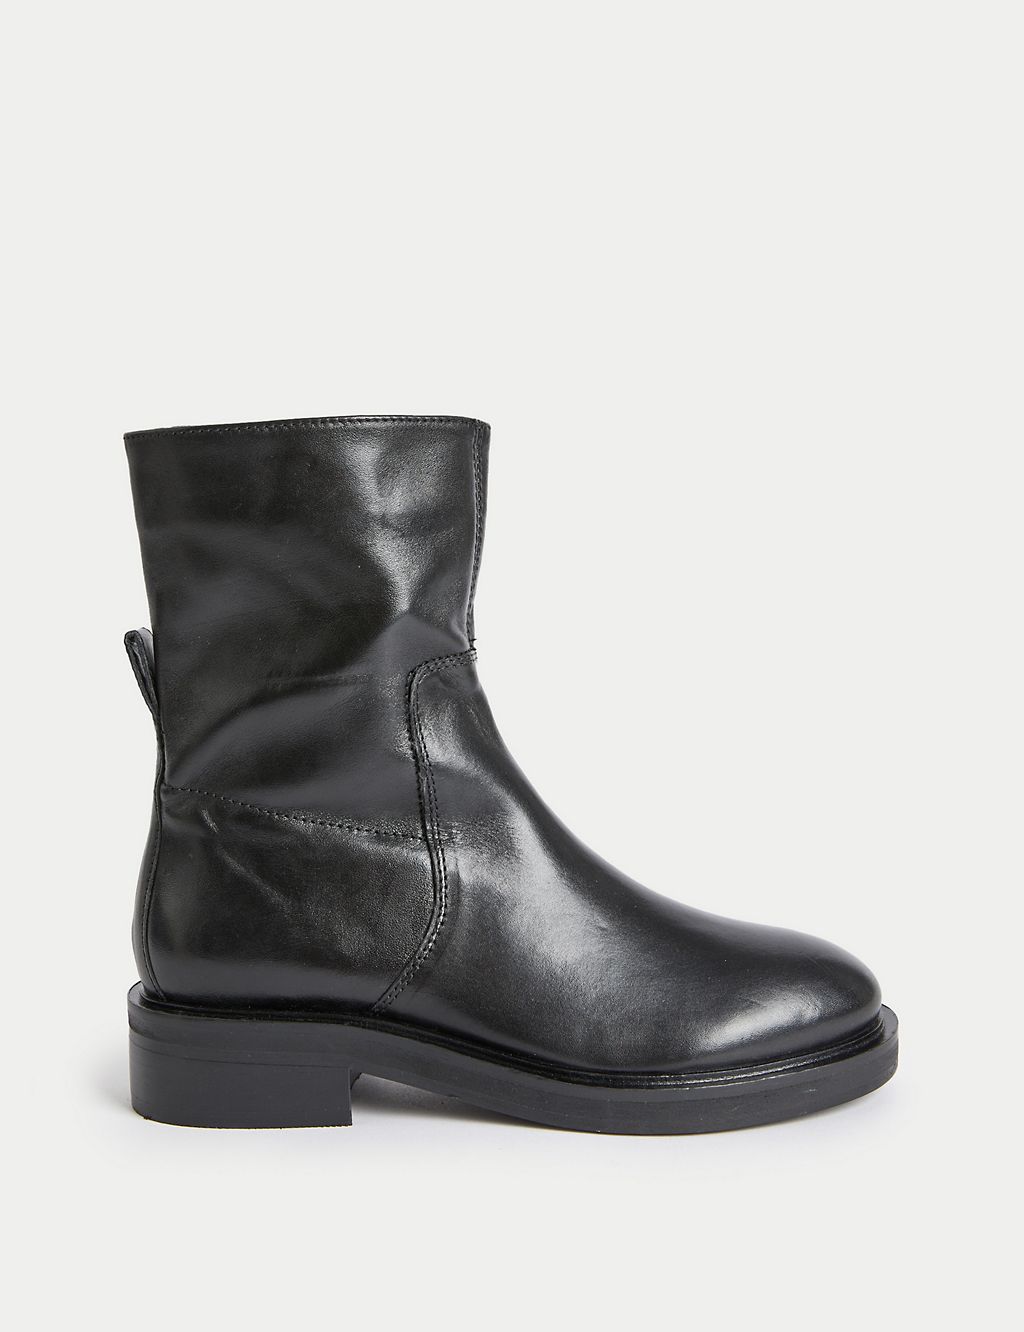 Leather Flatform Round Toe Ankle Boots 1 of 3